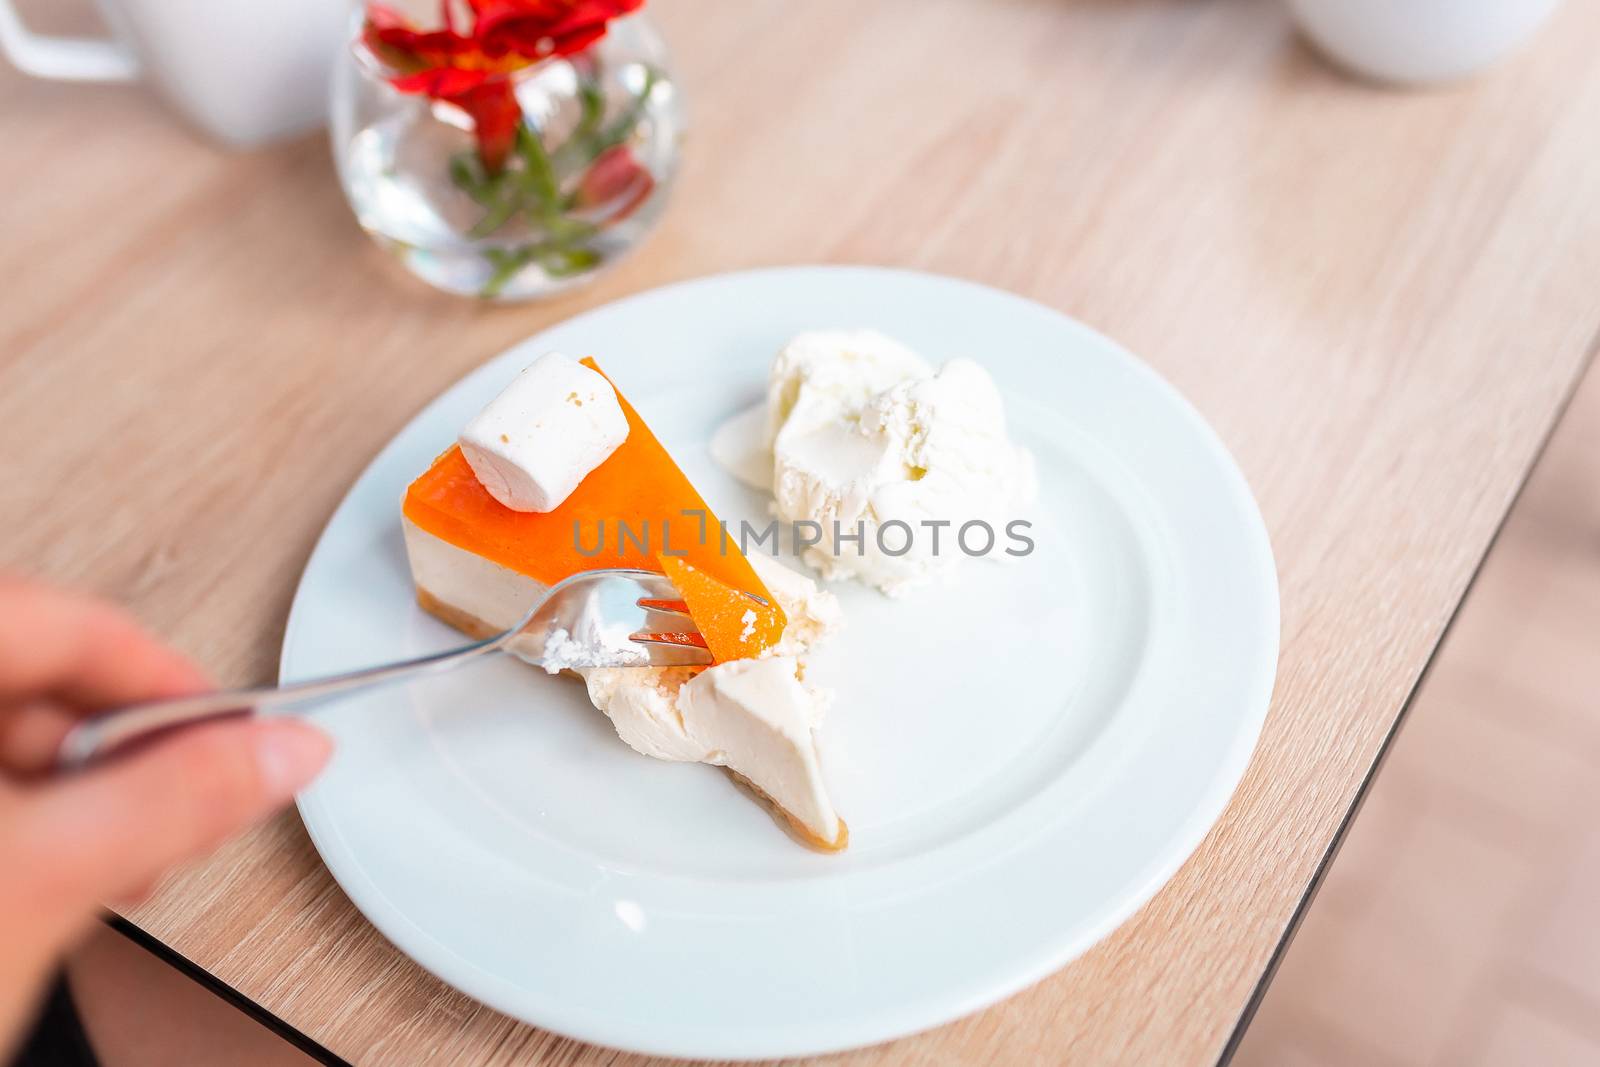 A piece of delicious original cheesecake served with ice cream